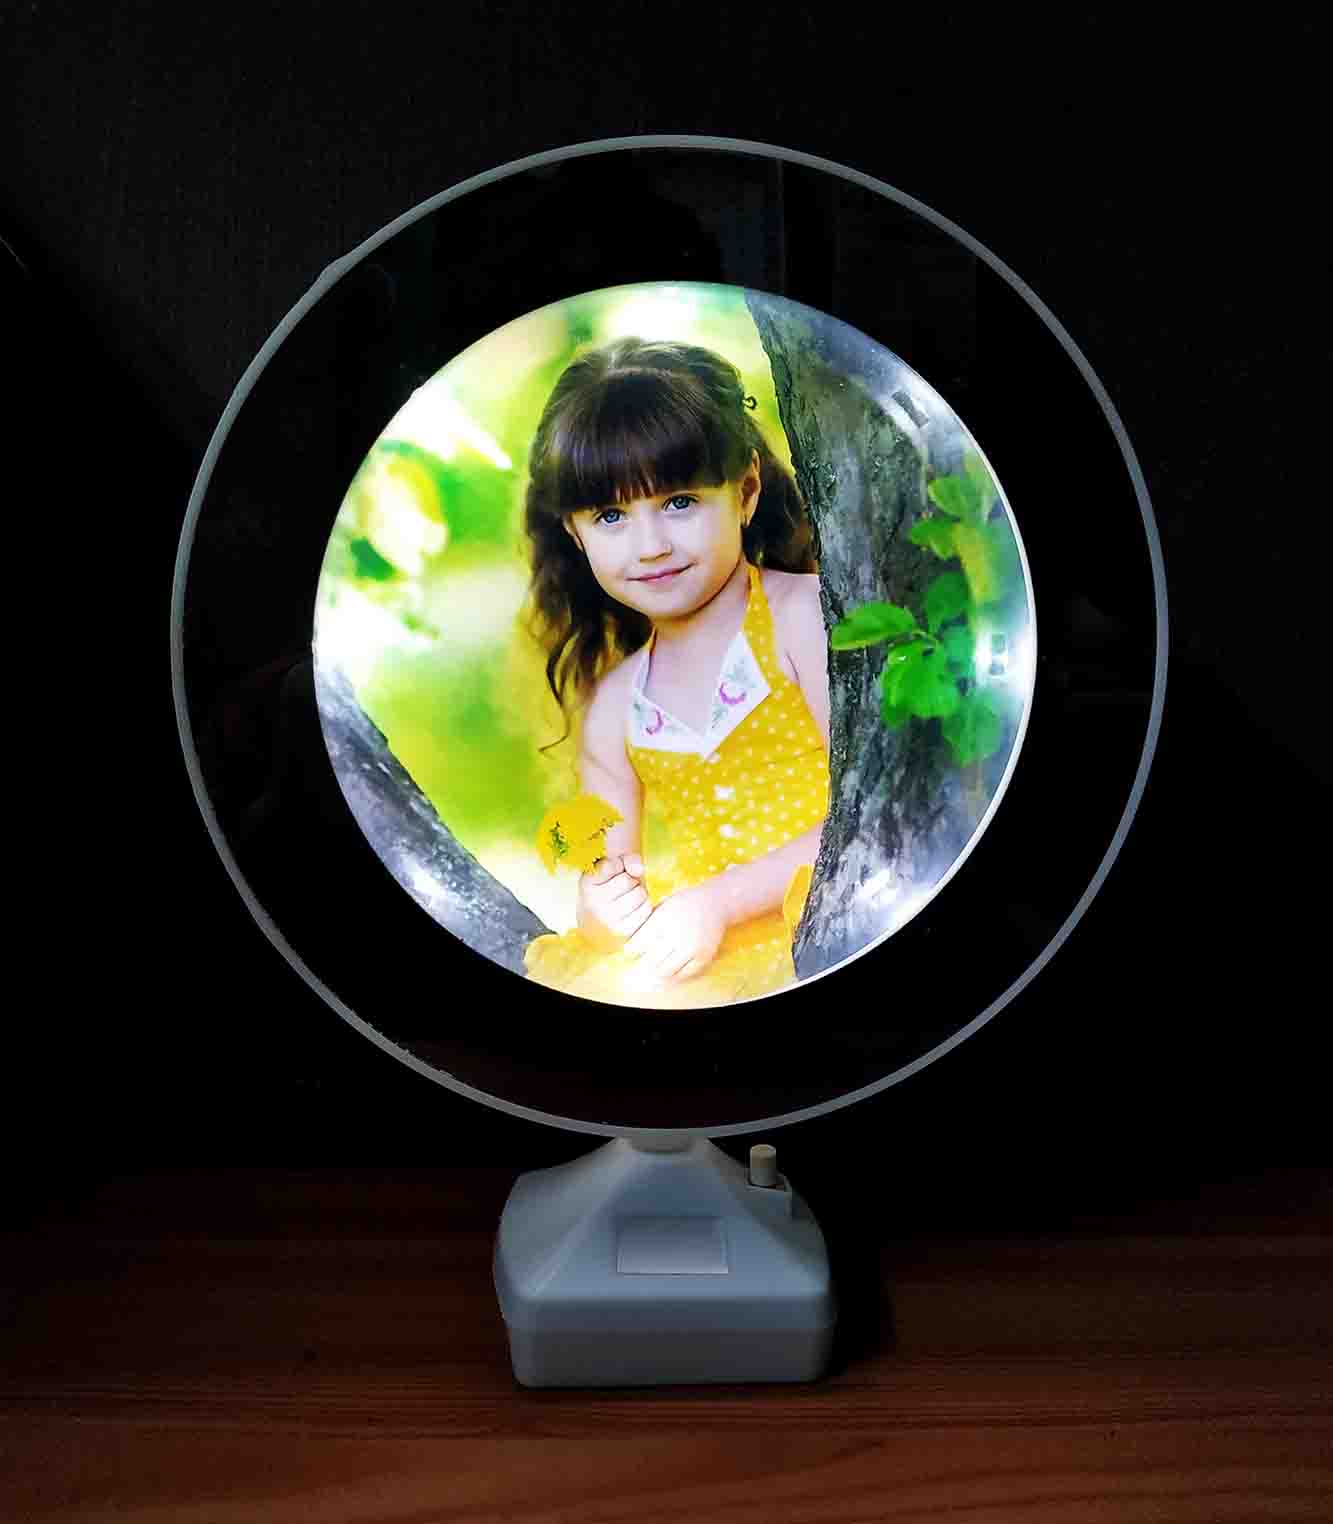 SAVRI Personalized Magic LED Mirror - Your Photo Printed - Best Gift for  Valentine's Day, Anniversary, Birthday, House-